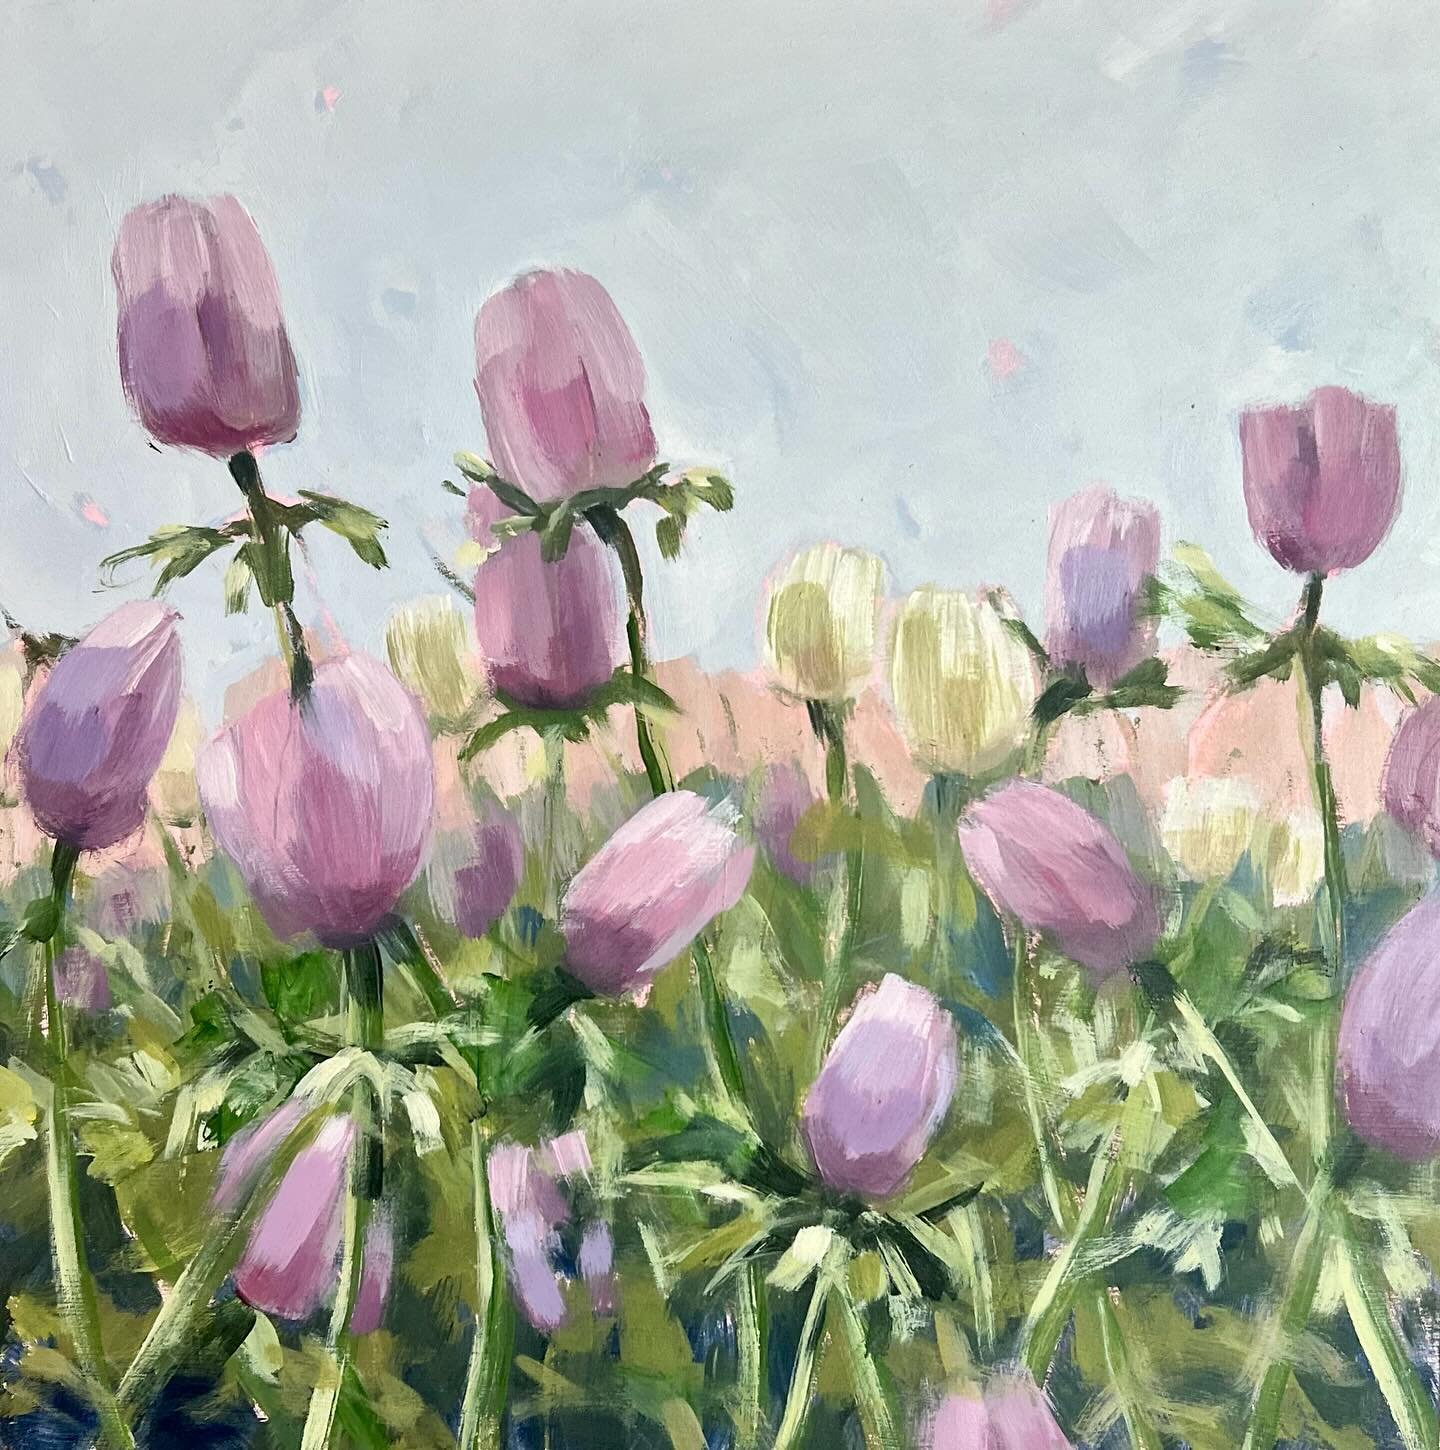 Three weeks from today, Flowers of the Field will be available (May 9th).

Paintings take a little  longer to complete than they use to. I&rsquo;m hoping to have 7 completed for this special series that first released 3 years ago. But we&rsquo;ll see